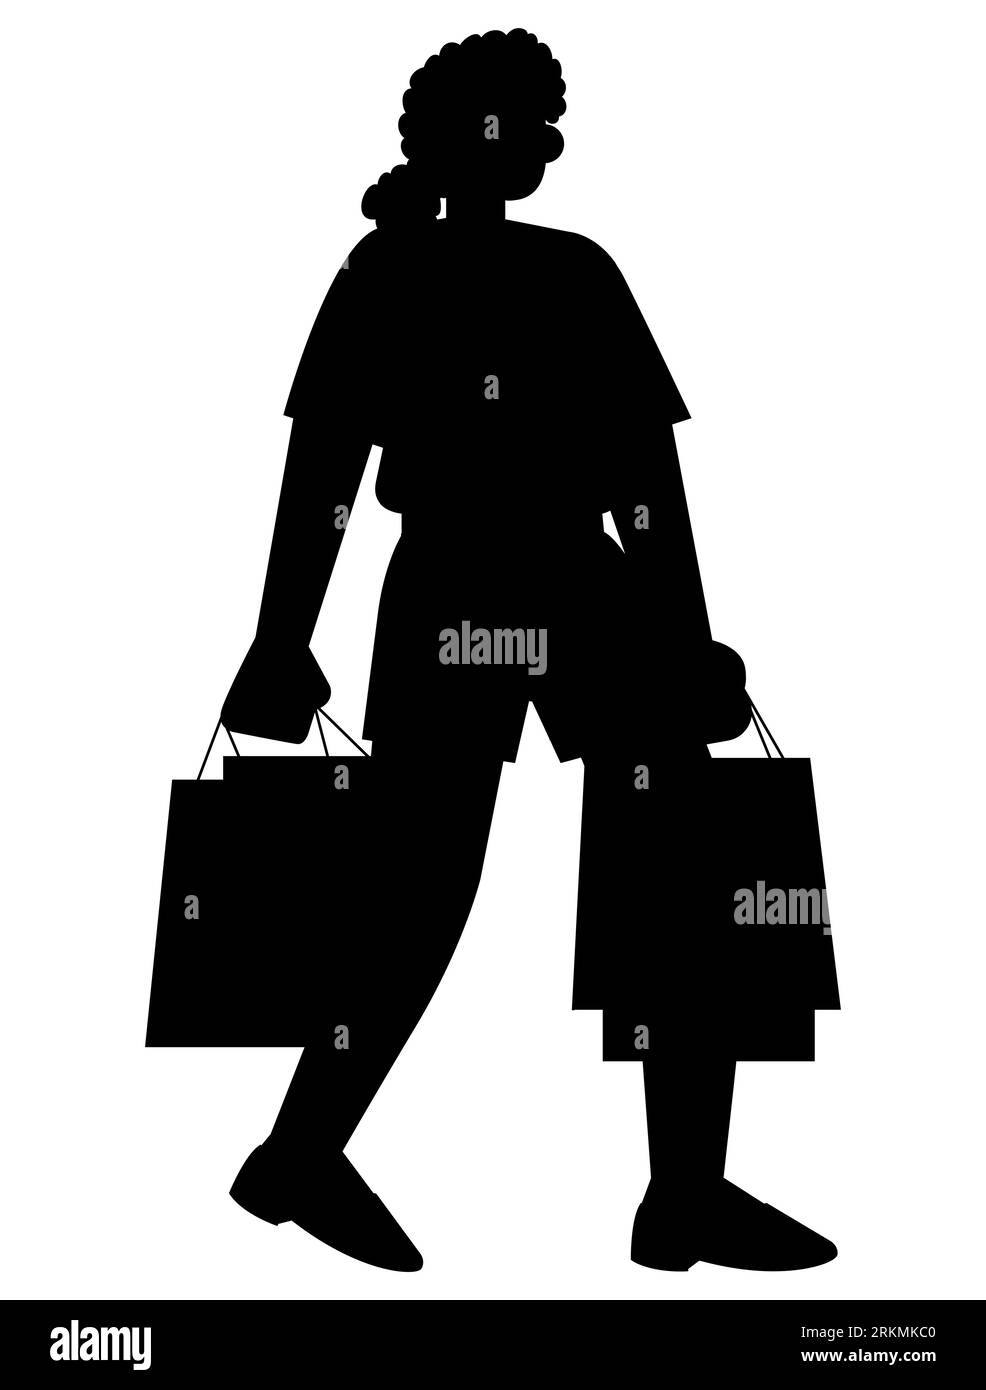 Black silhouette of a fashion woman holding shopping bags walking in the shopping store mall, vector isolated on white background Stock Vector